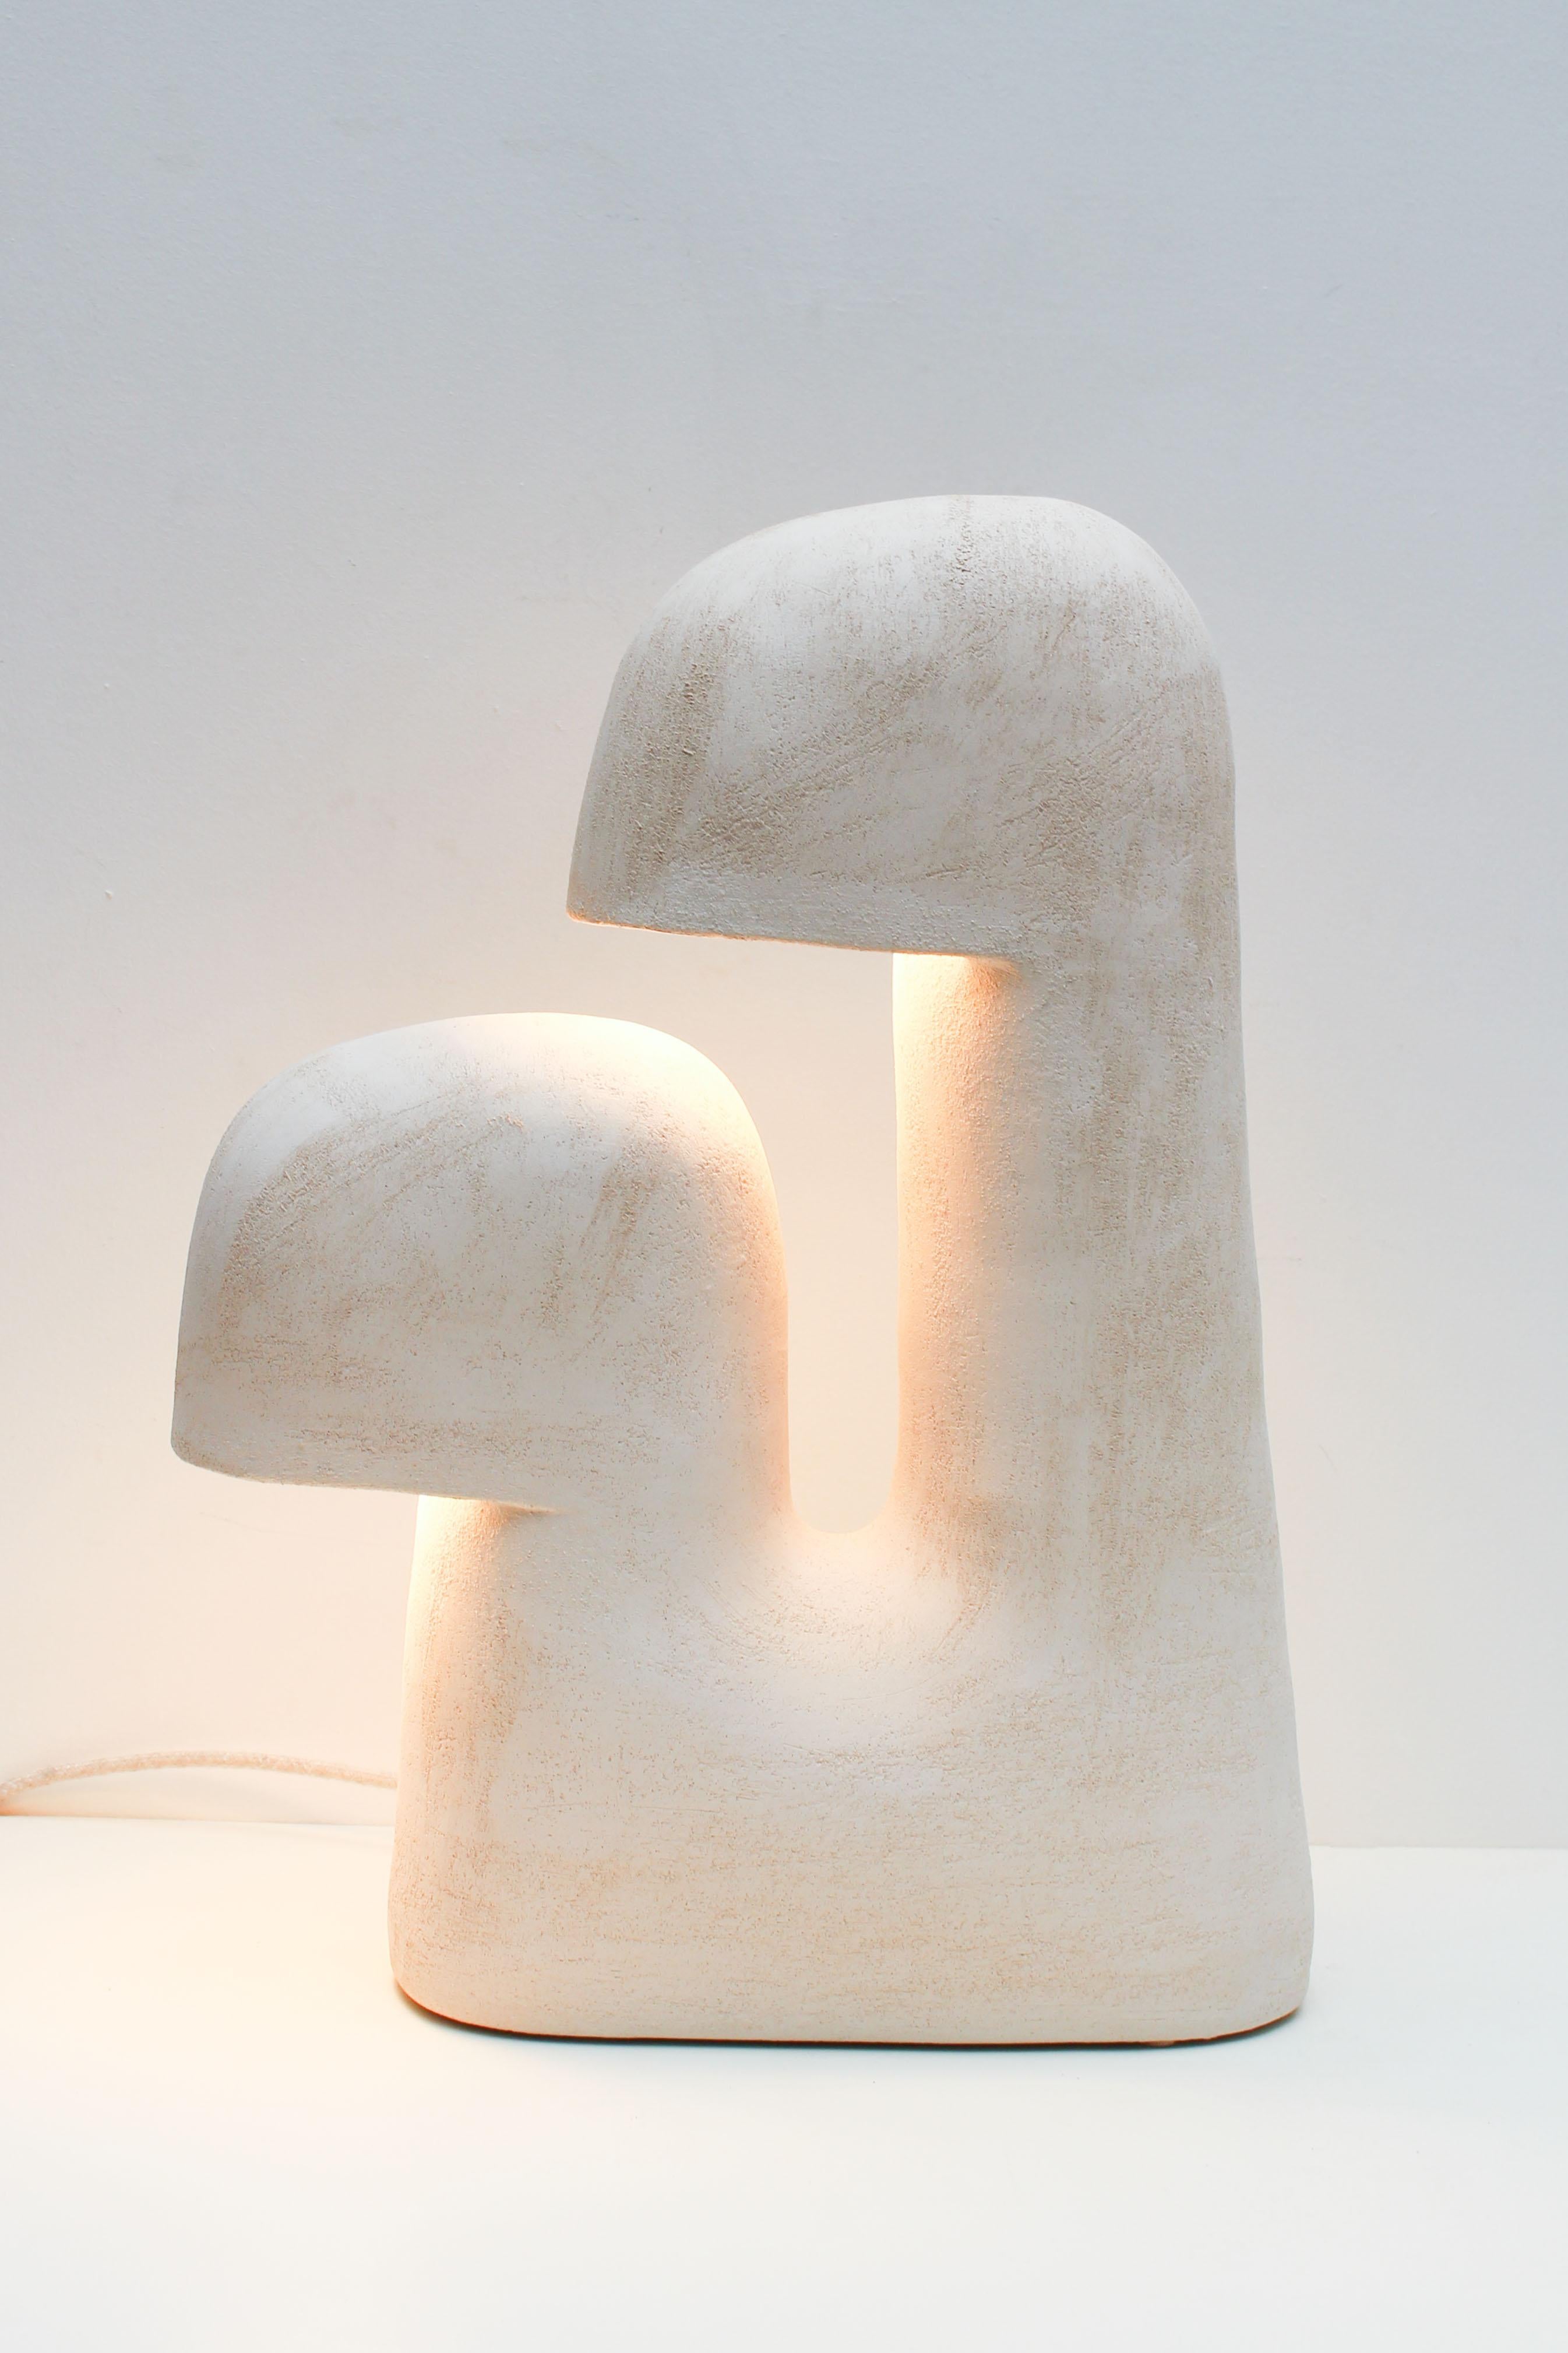 Édifice white stoneware table lamp by Elisa Uberti
Materials: White Stoneware
Dimensions: 53 x 39 x 15 cm

After fifteen years in fashion, Elisa Uberti decides to take the time to work with these hands and to give birth to new